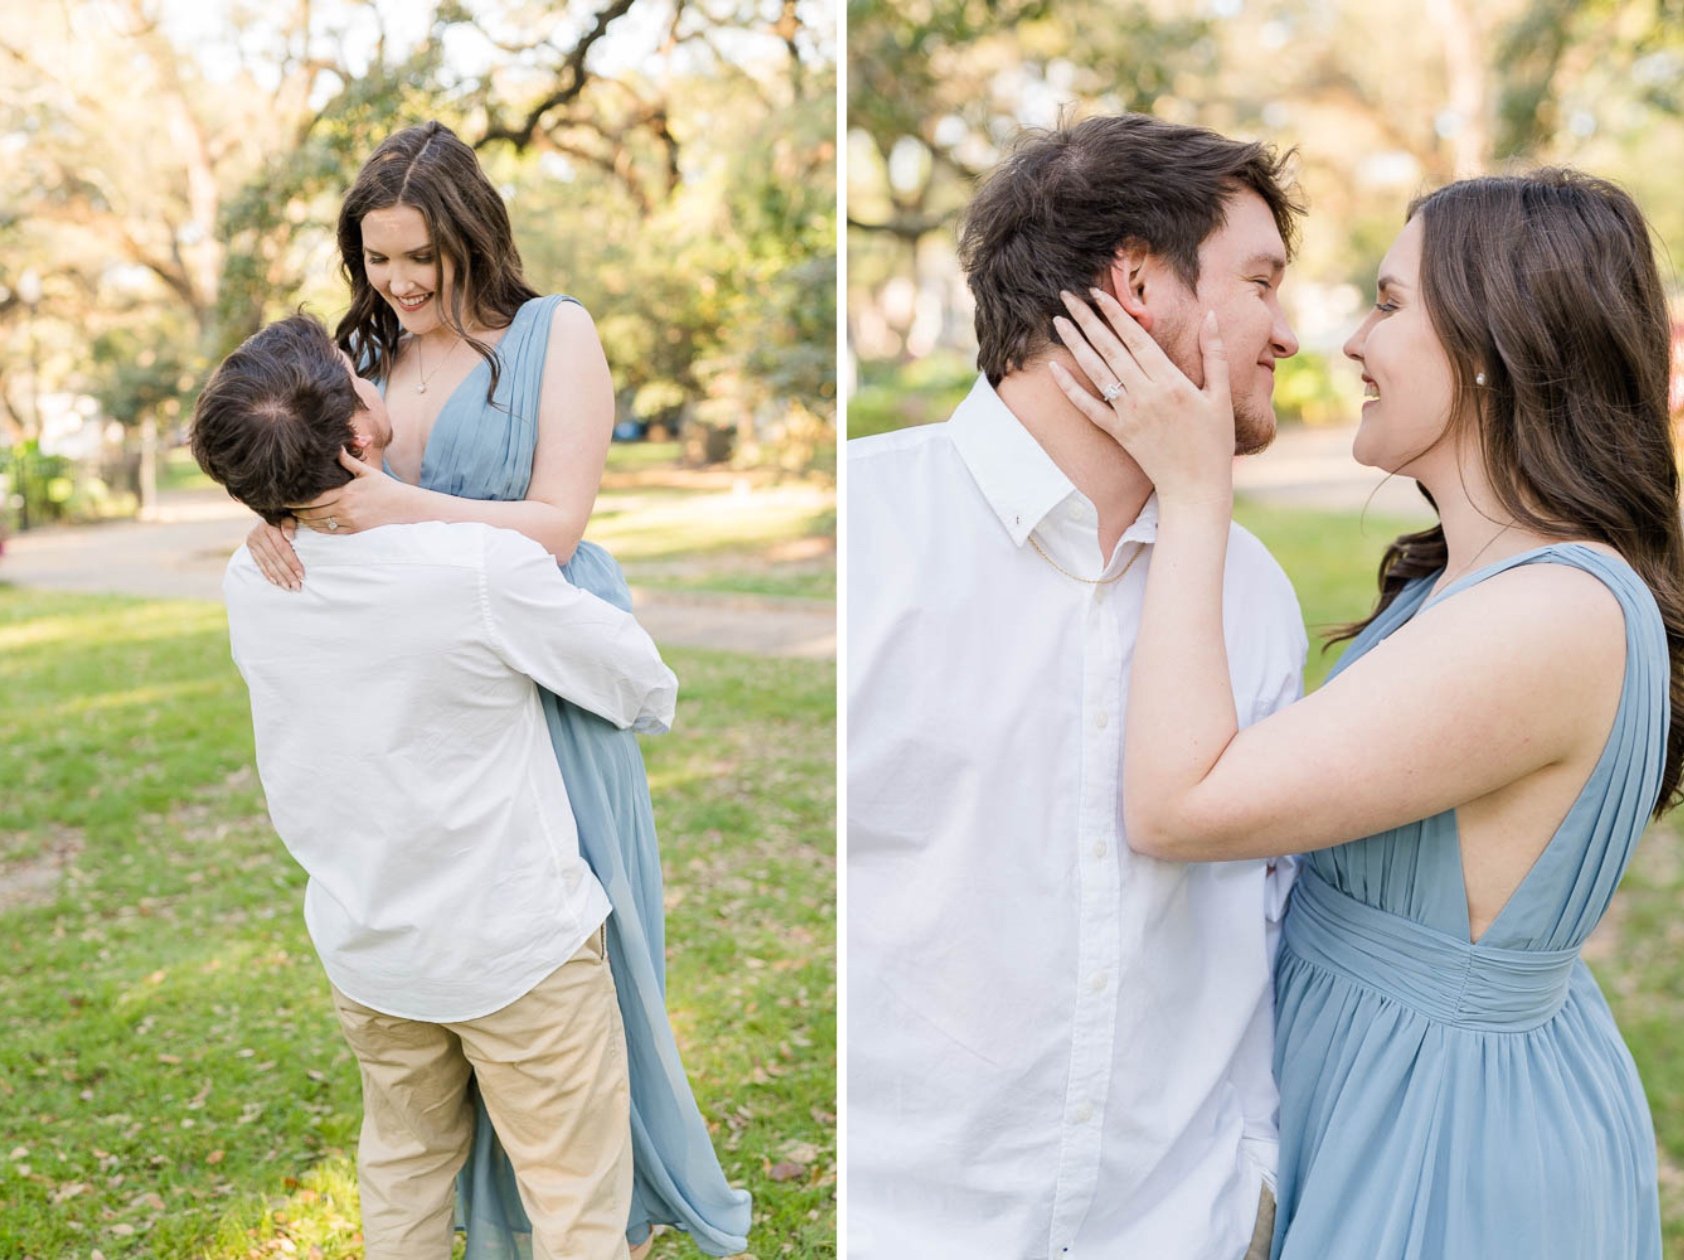 Washington Square Park Engagement Session Photoshoot in Spring in Midtown Mobile, Alabama Photographed by Kristen Marcus Photography 